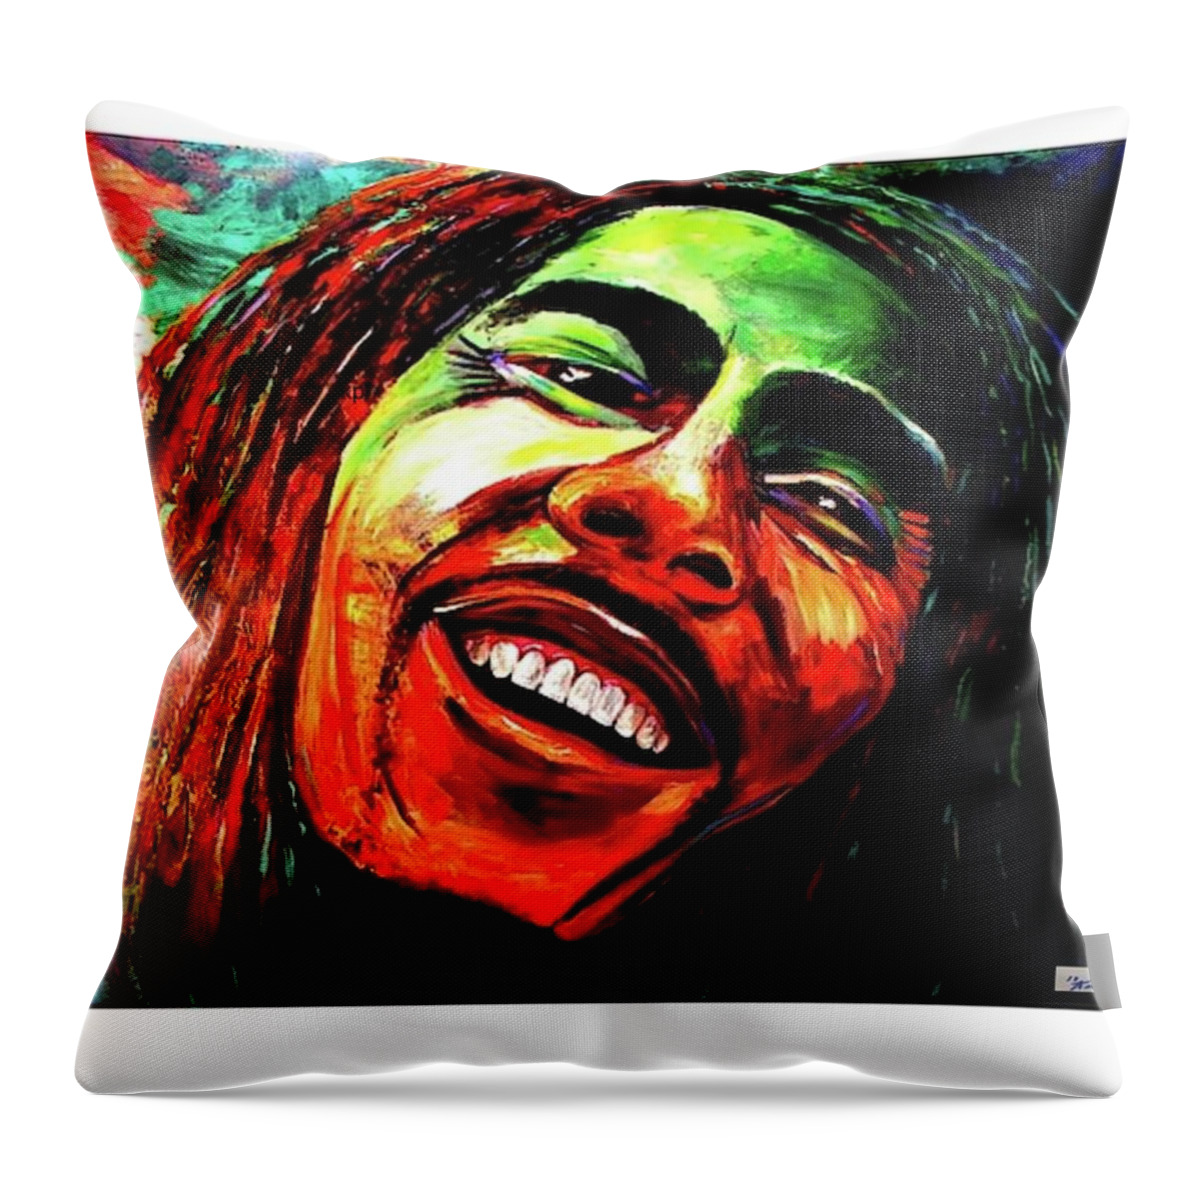 Marley Wild Singer Swinger Throw Pillow featuring the painting Marley by Ken Pridgeon